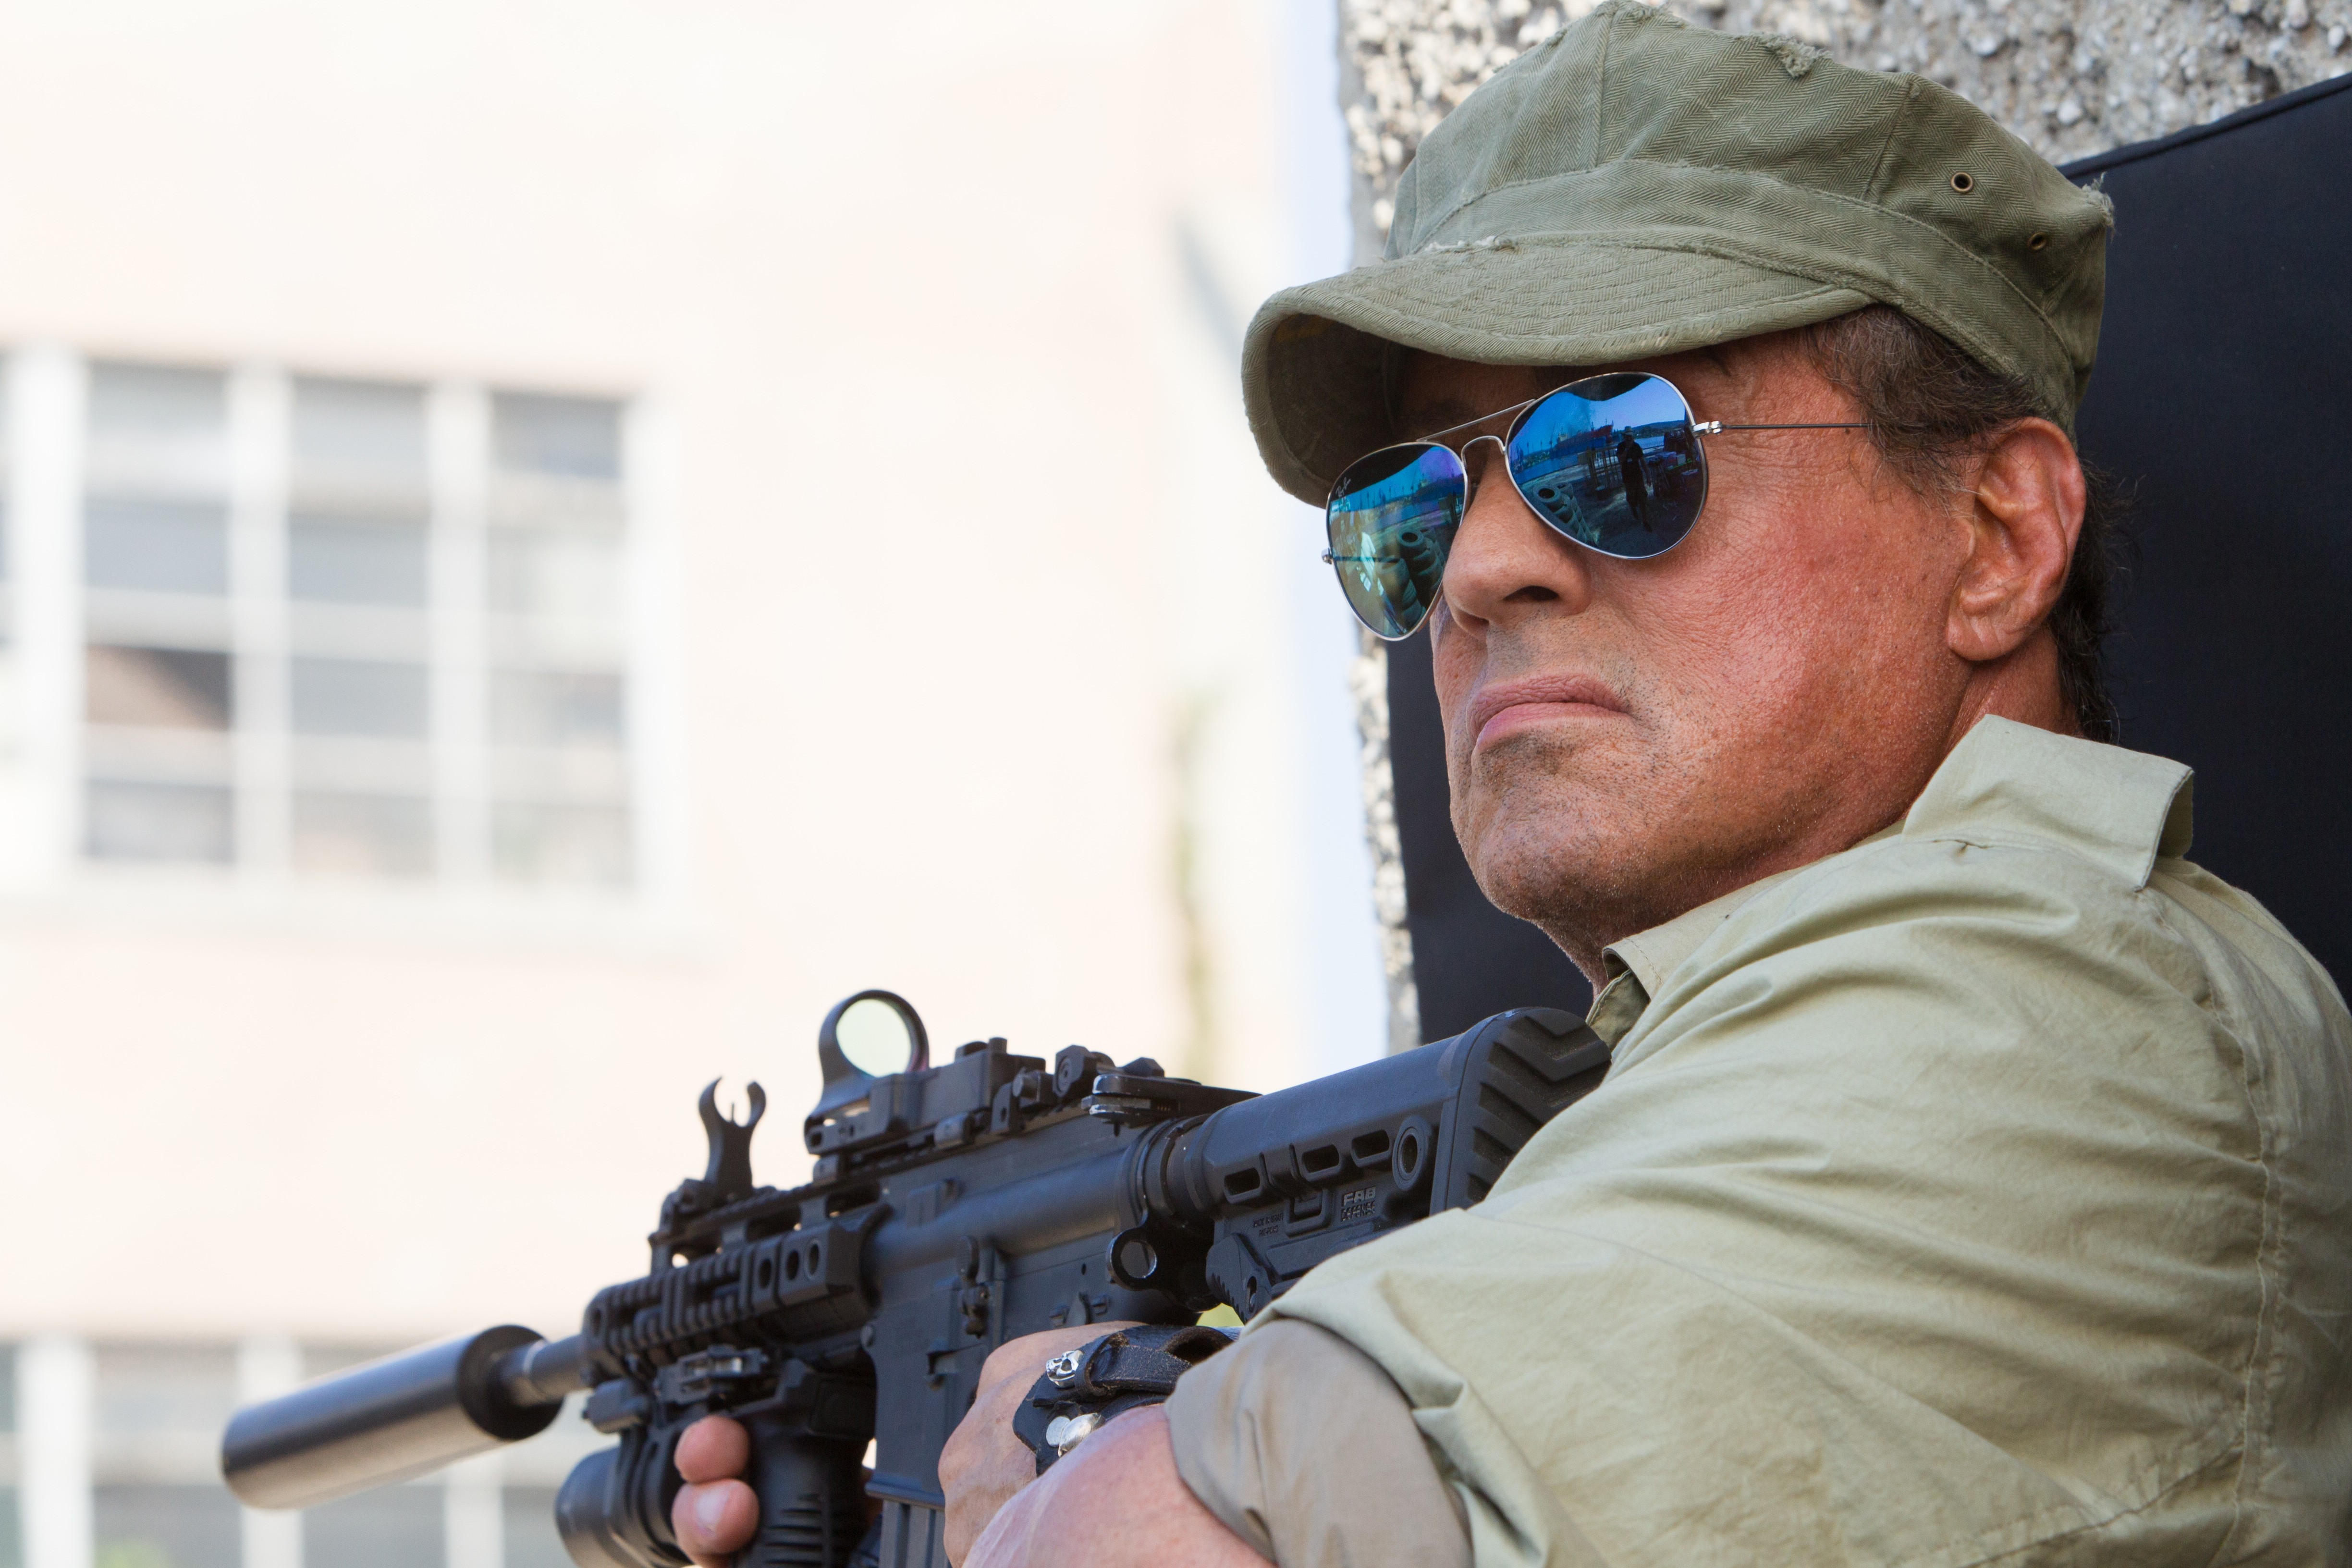 android sylvester stallone, movie, the expendables 3, barney ross, the expendables